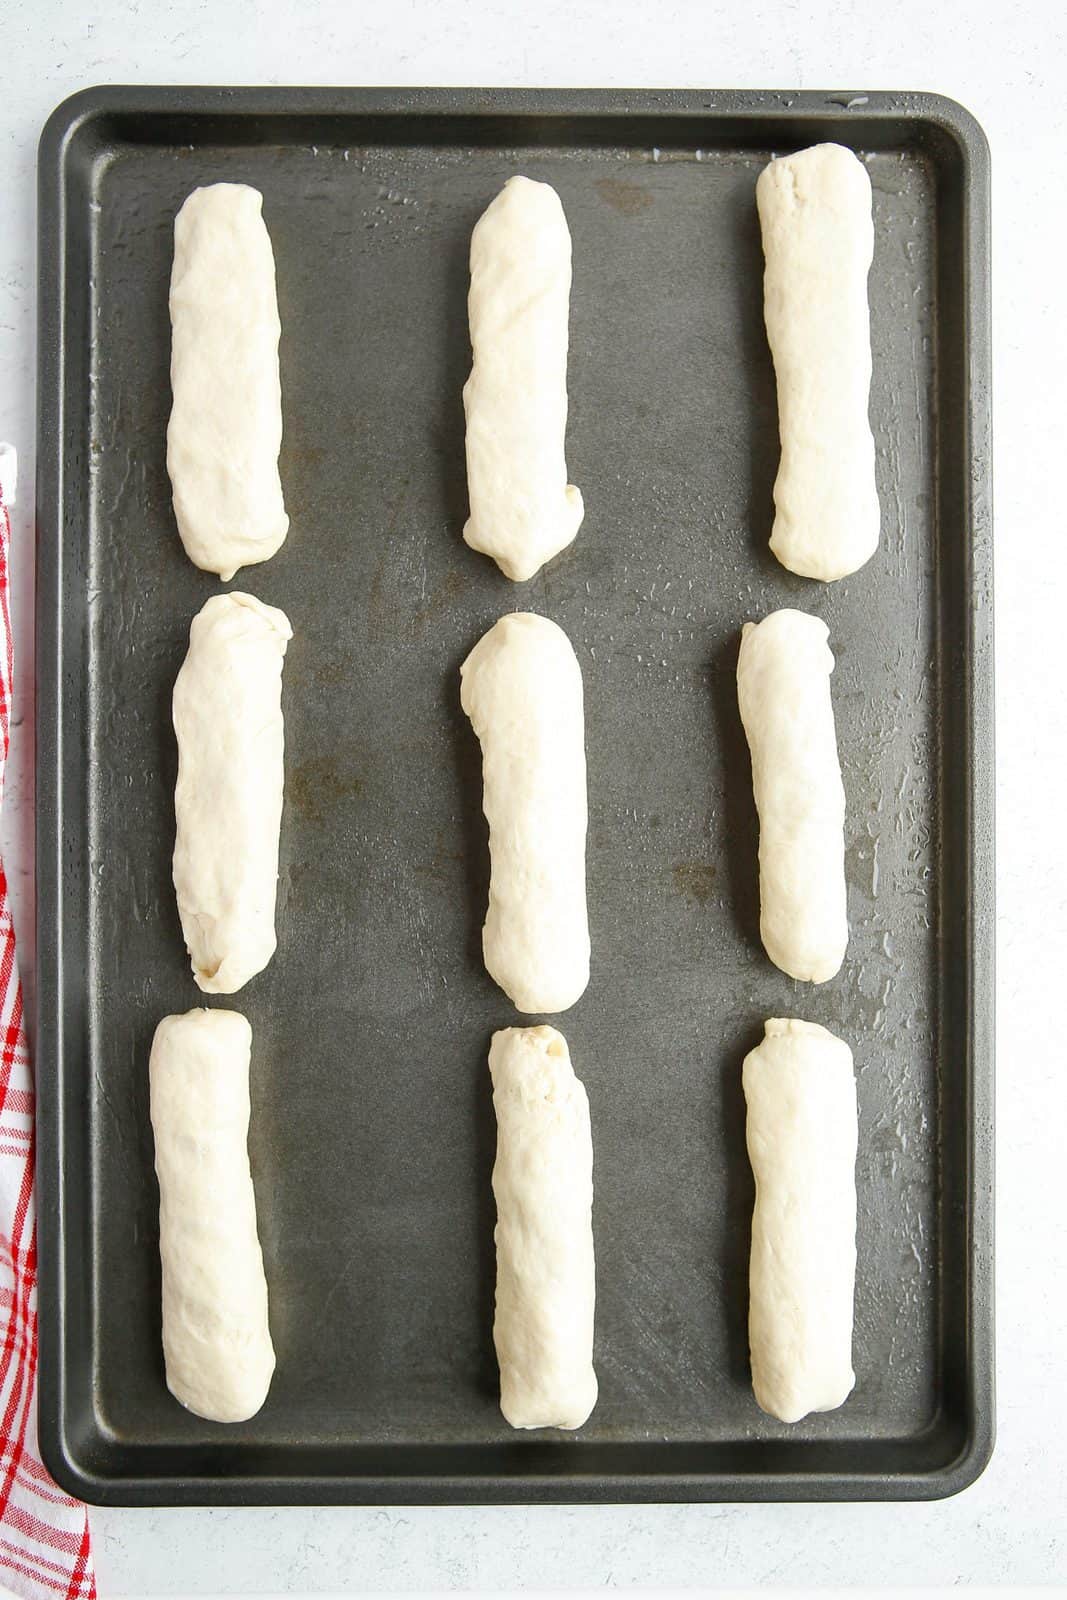 Rolled up and sealed breadsticks on baking sheet.